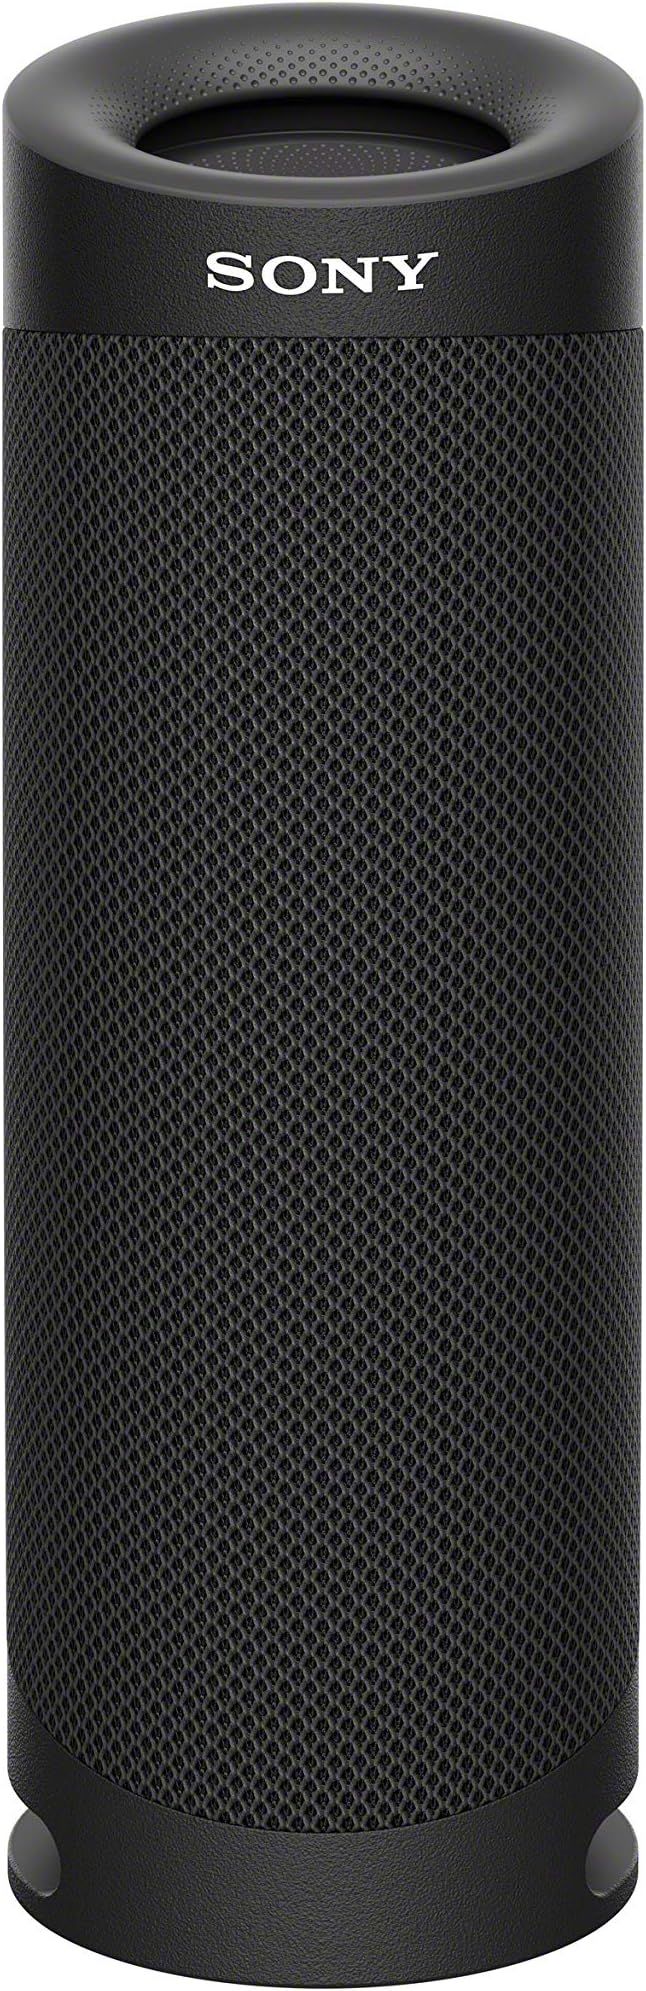 Sony SRS-XB23 EXTRA BASS Wireless Portable Speaker IP67 Waterproof BLUETOOTH and Built In Mic for... | Amazon (US)